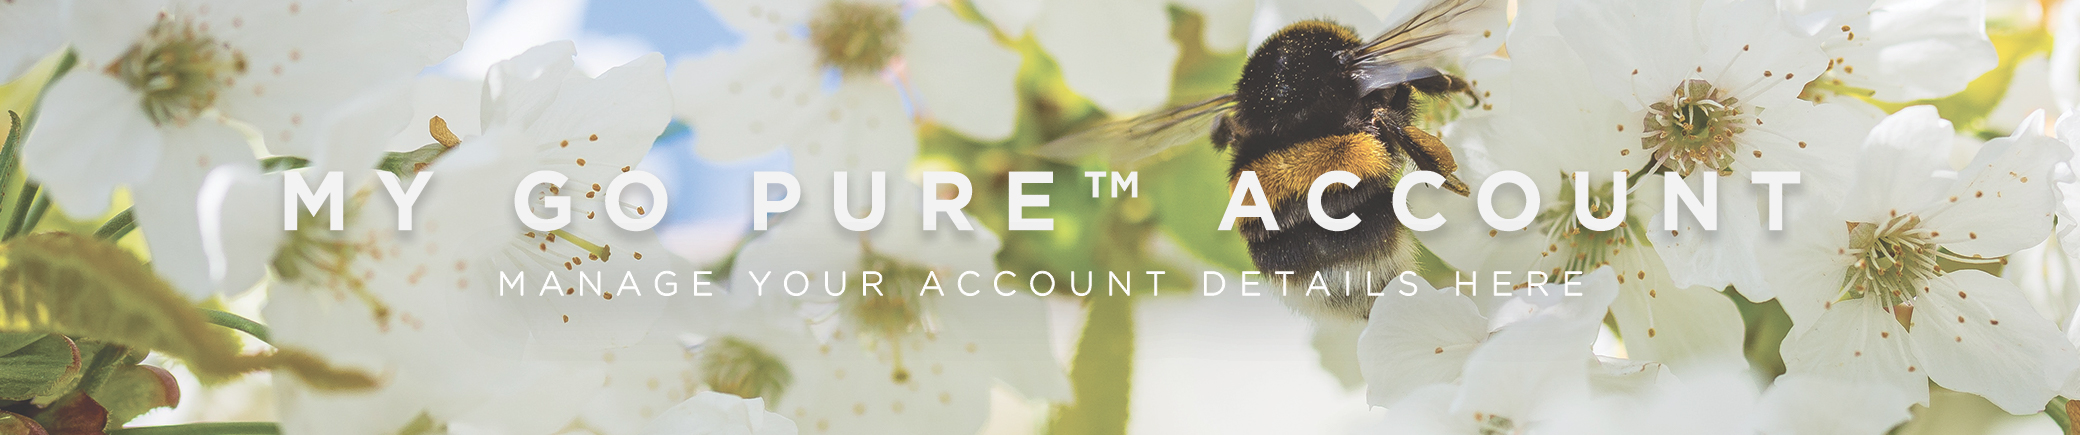 Go Pure Account - Manage your account here.